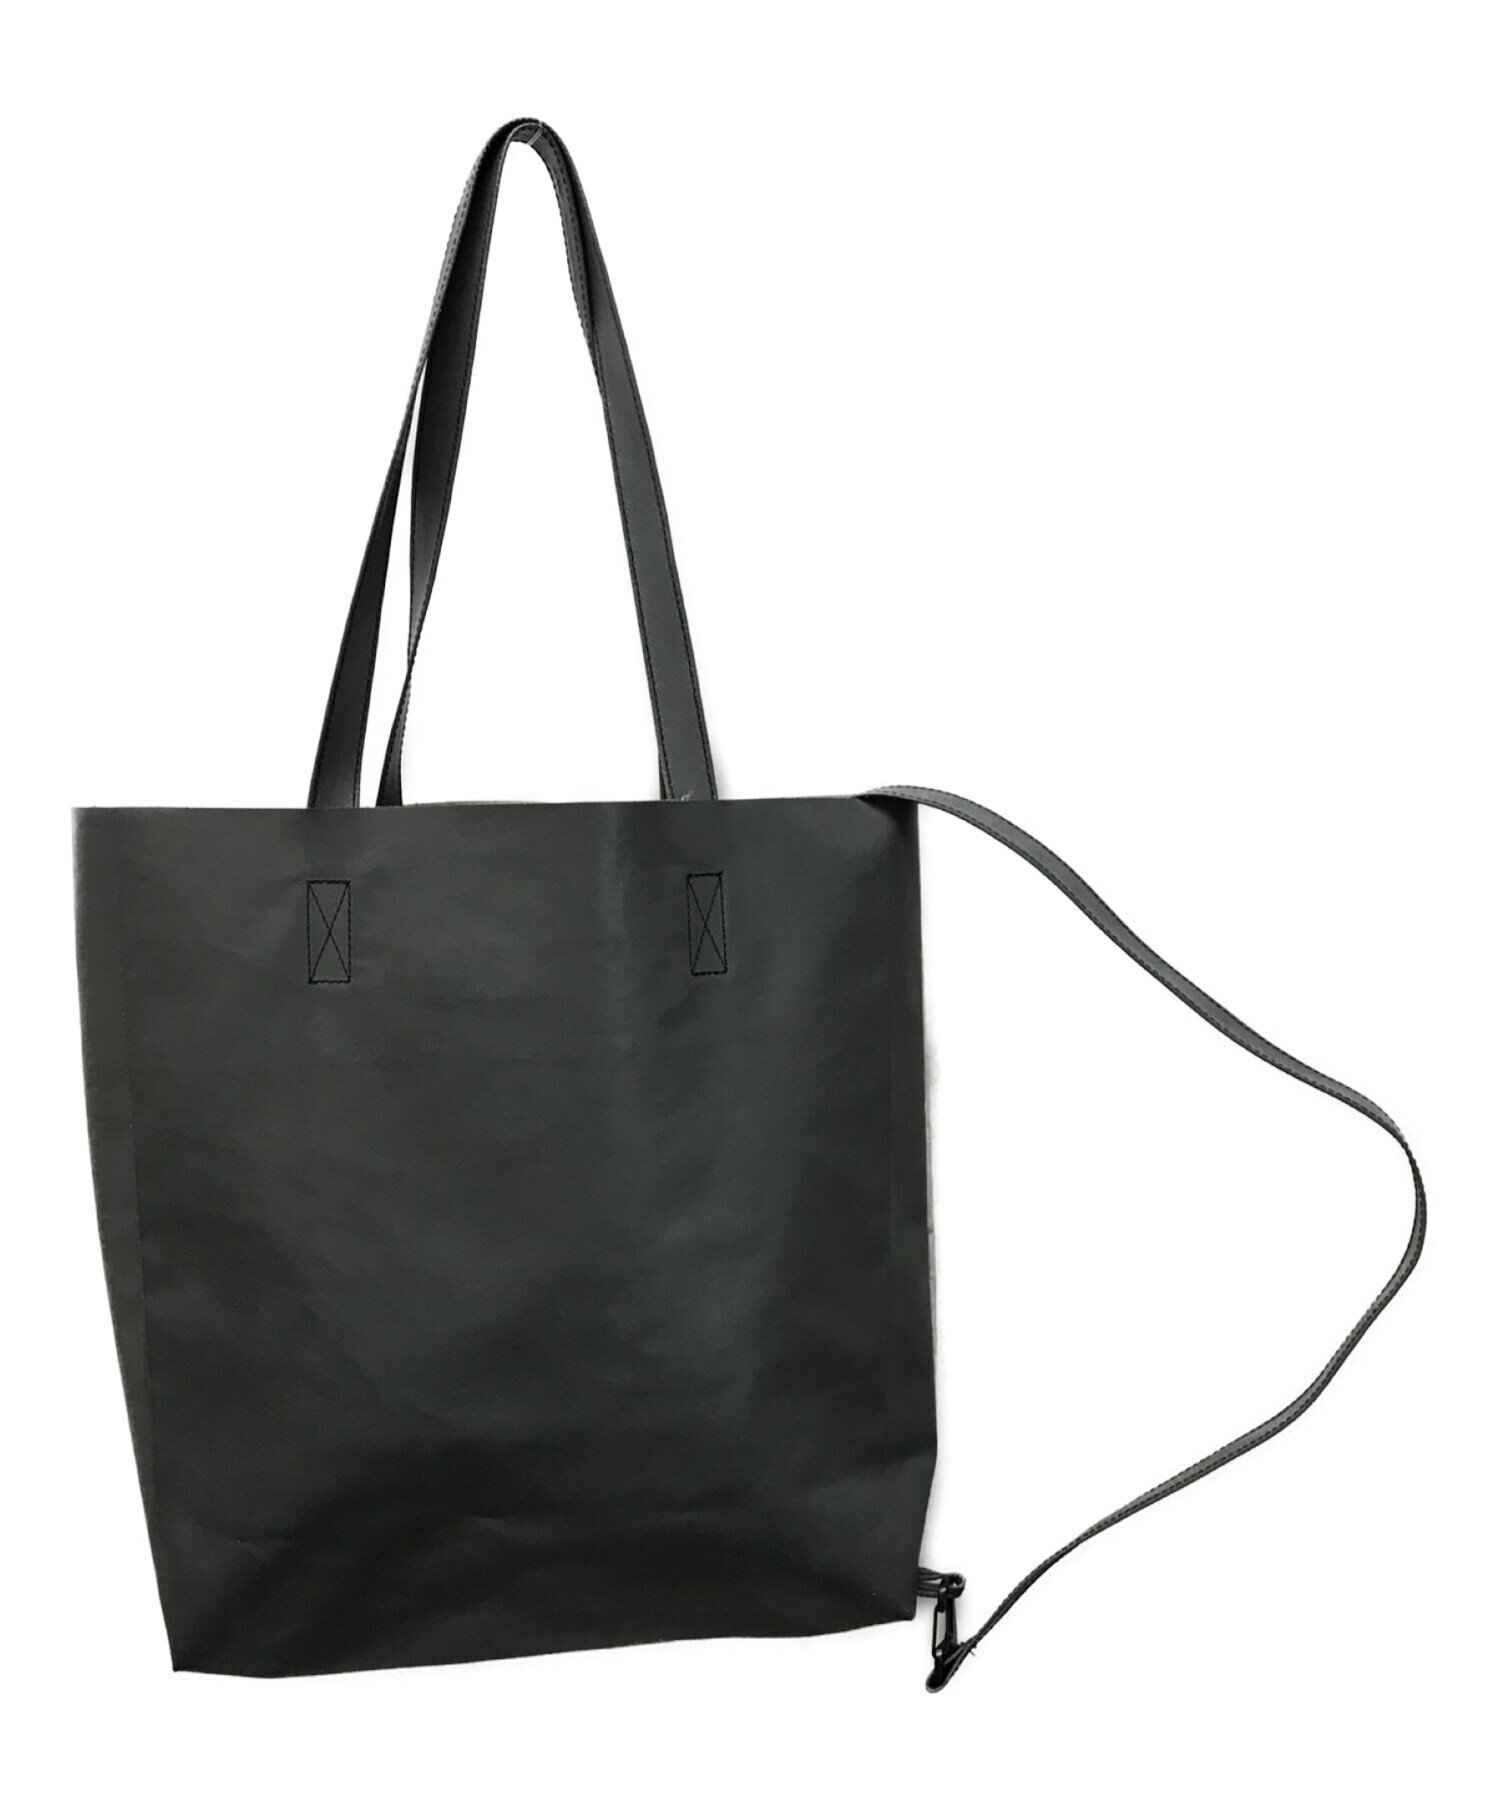 FREITAG (フライターグ) MAURICE 2WAYトートバッグ F261 モーリス BACKPACKABLE TOTE S グレー